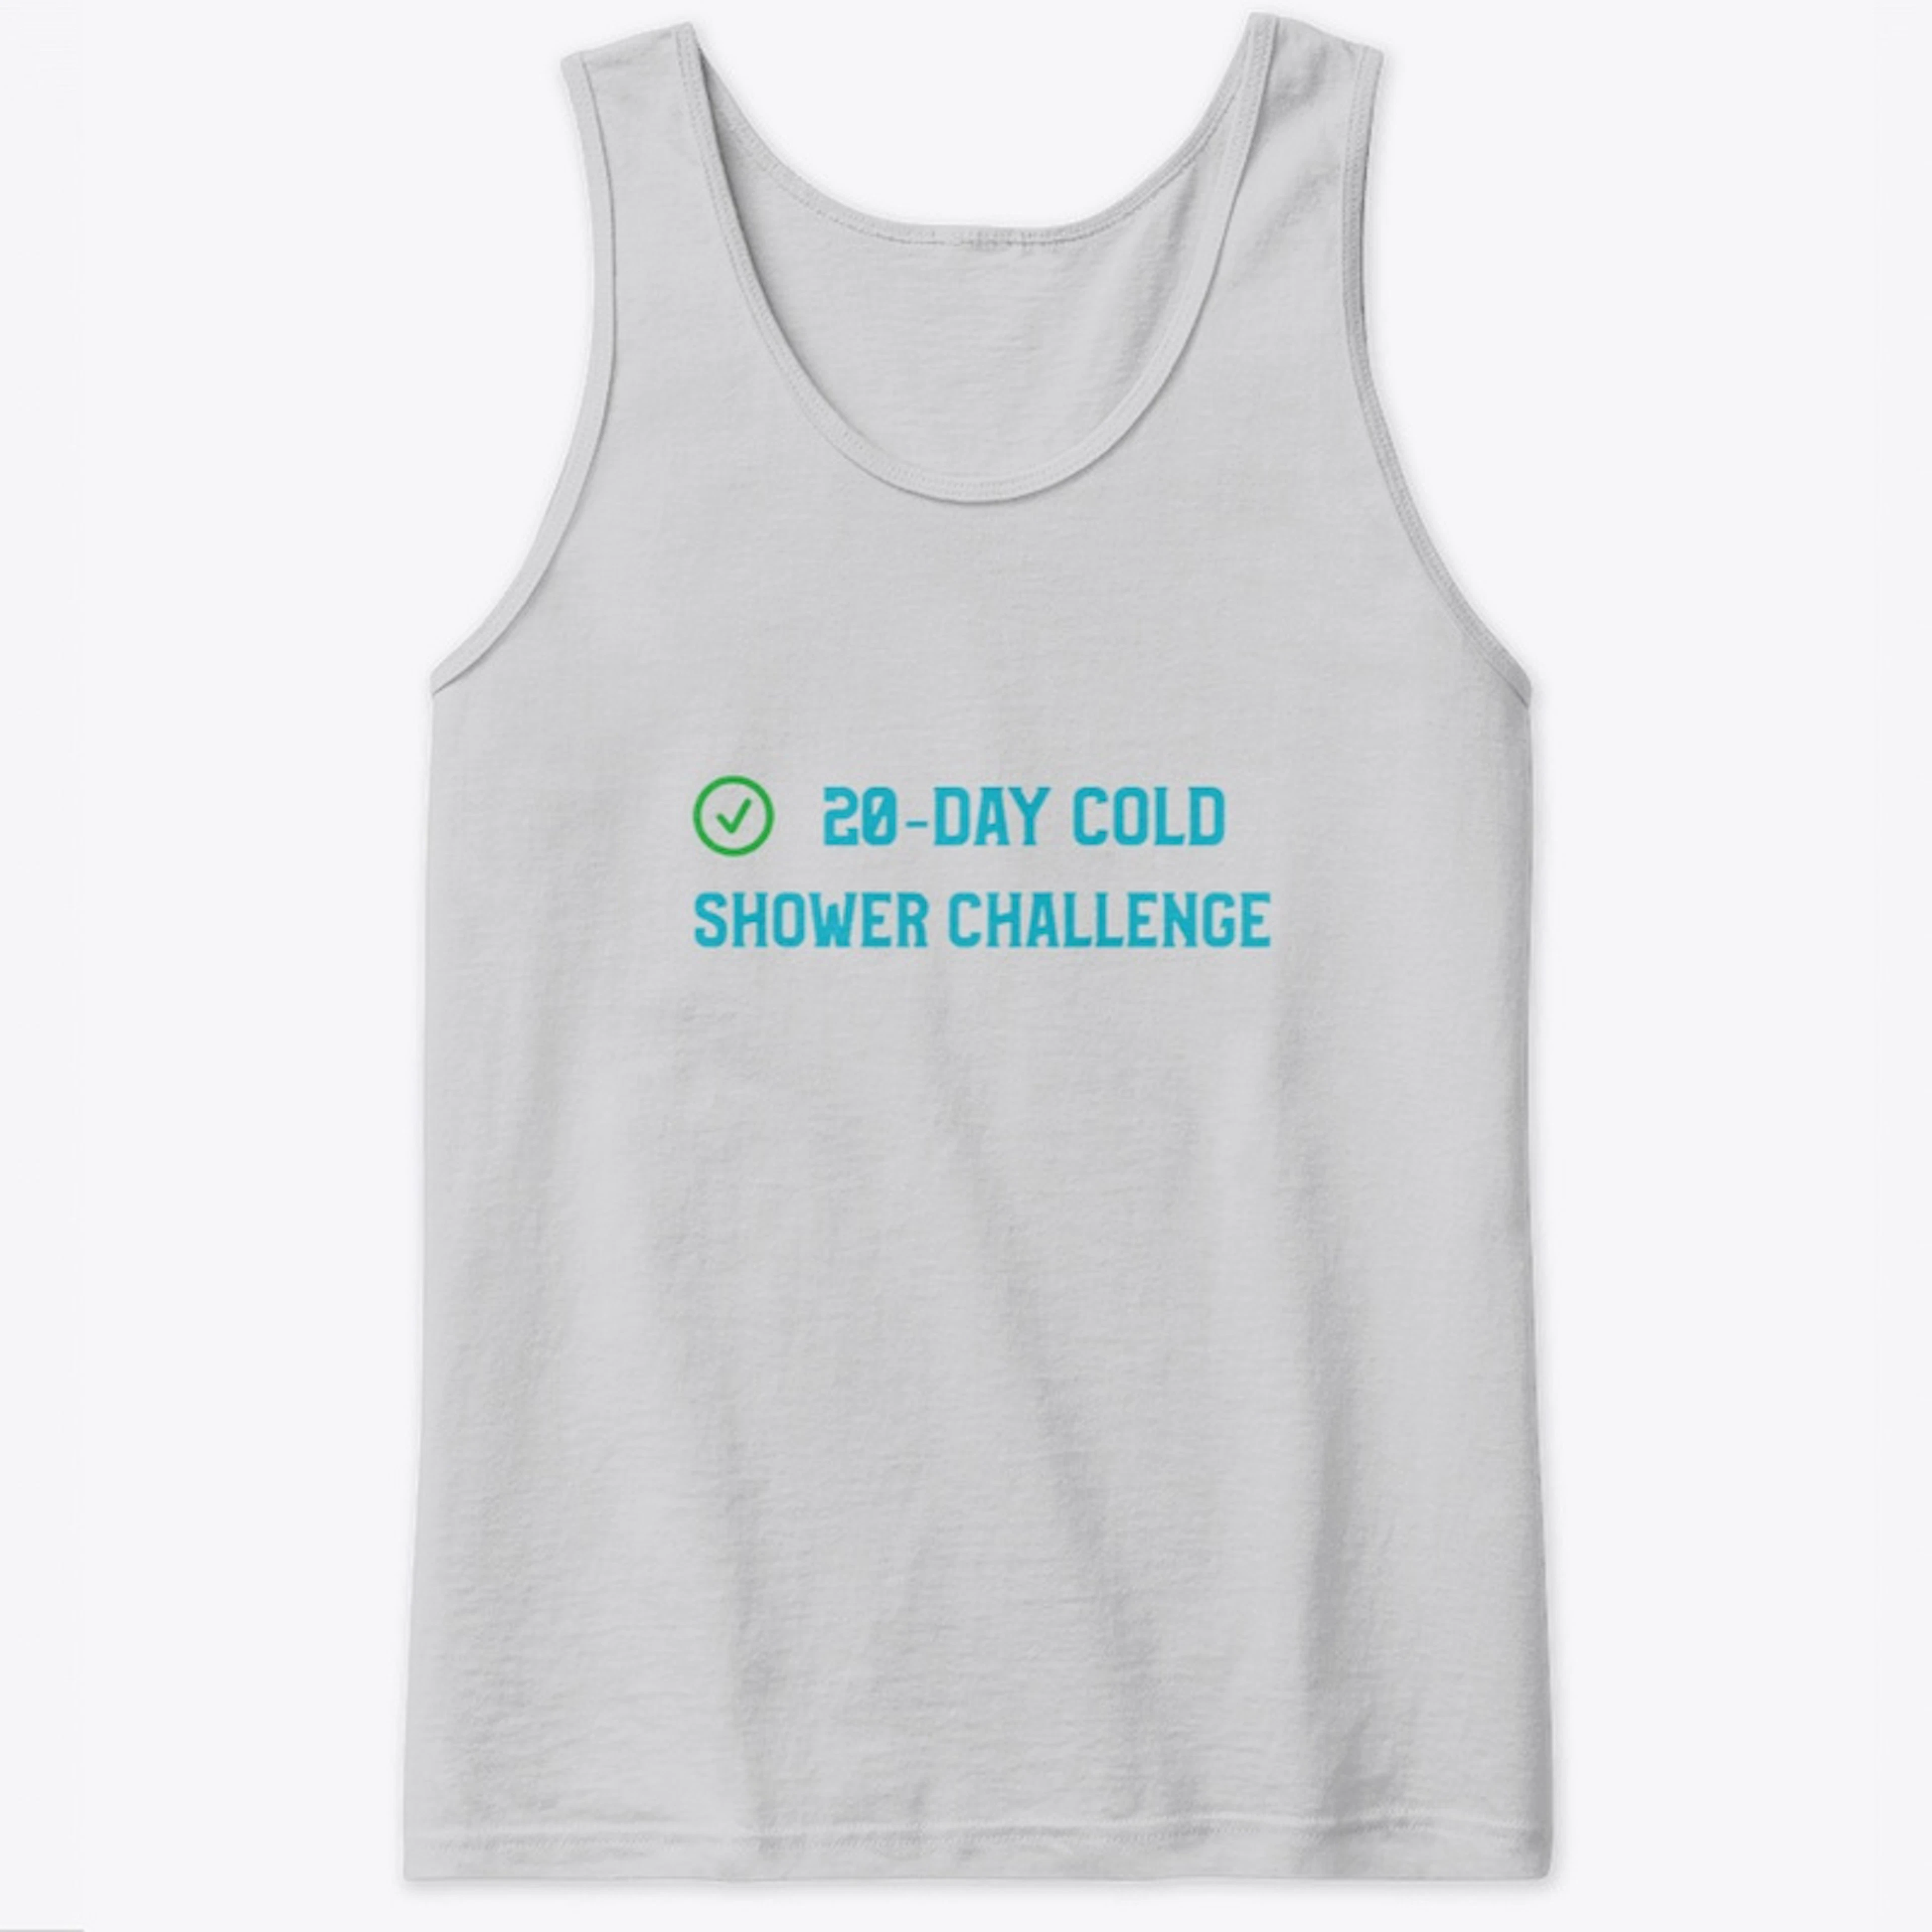 20-day cold shower challenge